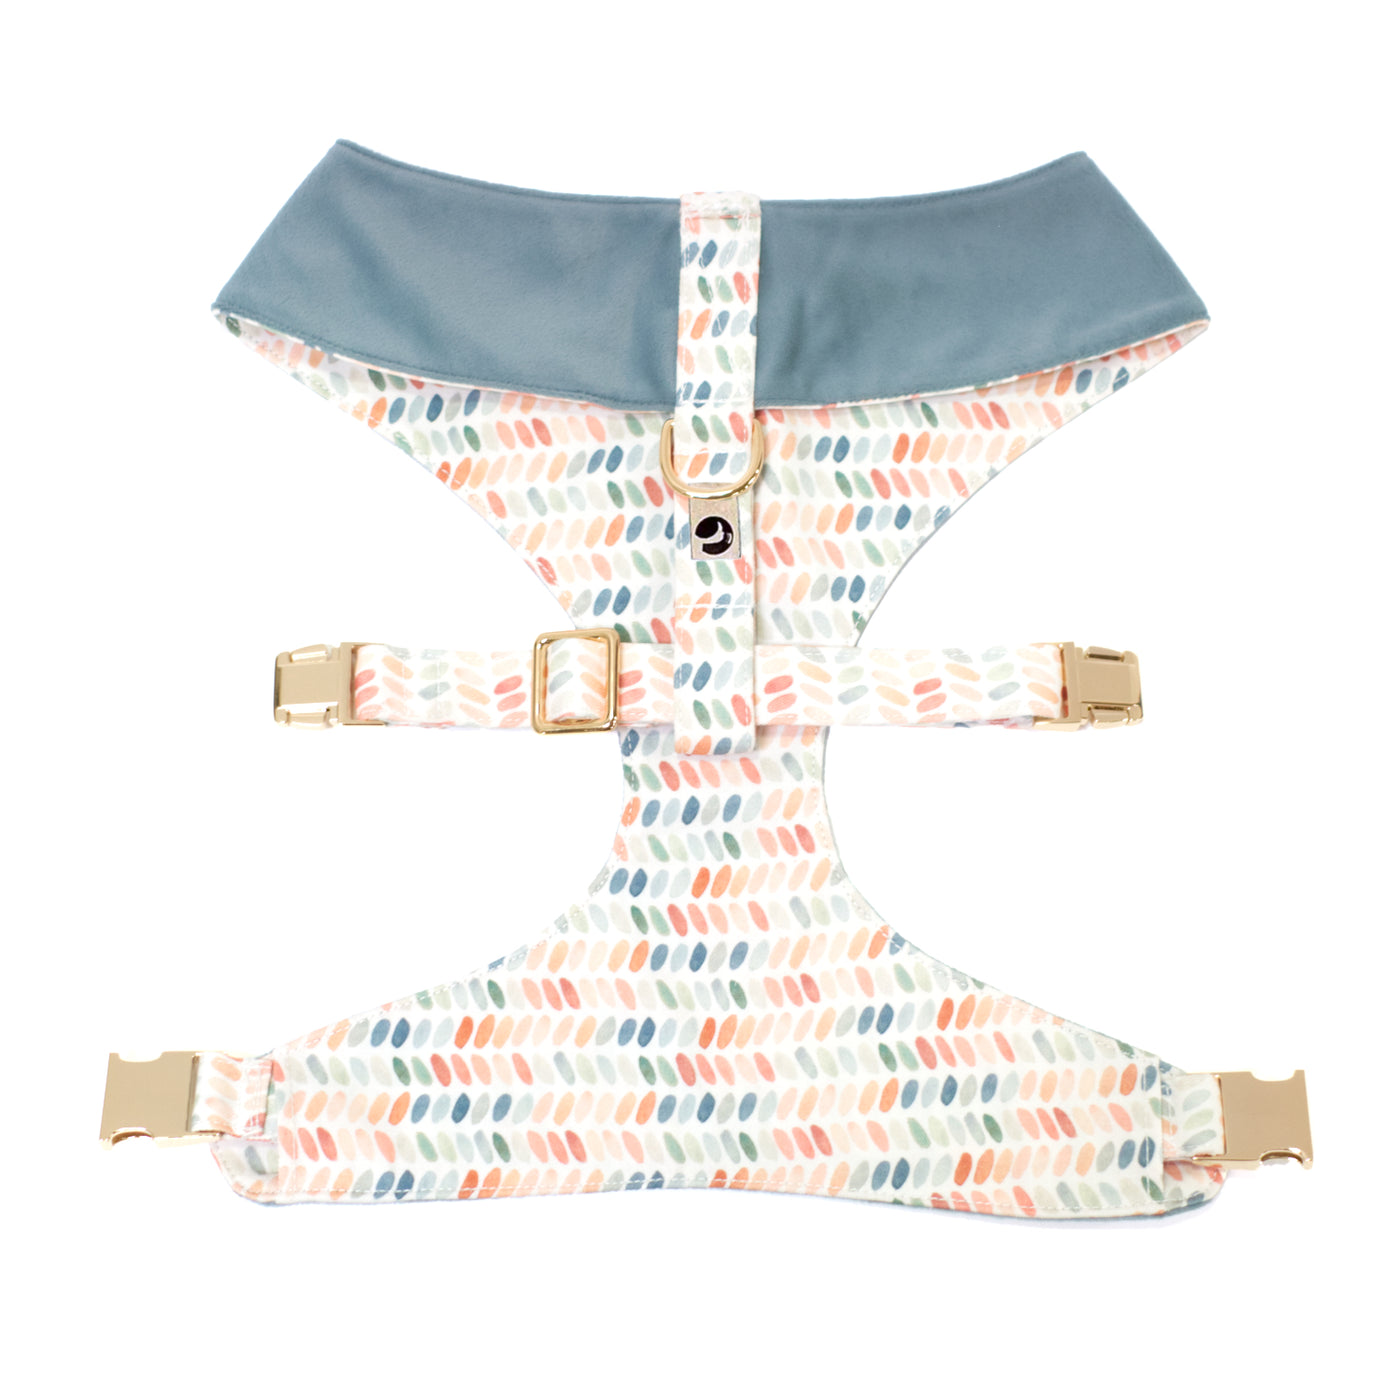 Back/top view of reversible dog harness in blue velvet and blue, rust and green dot print with gold hardware